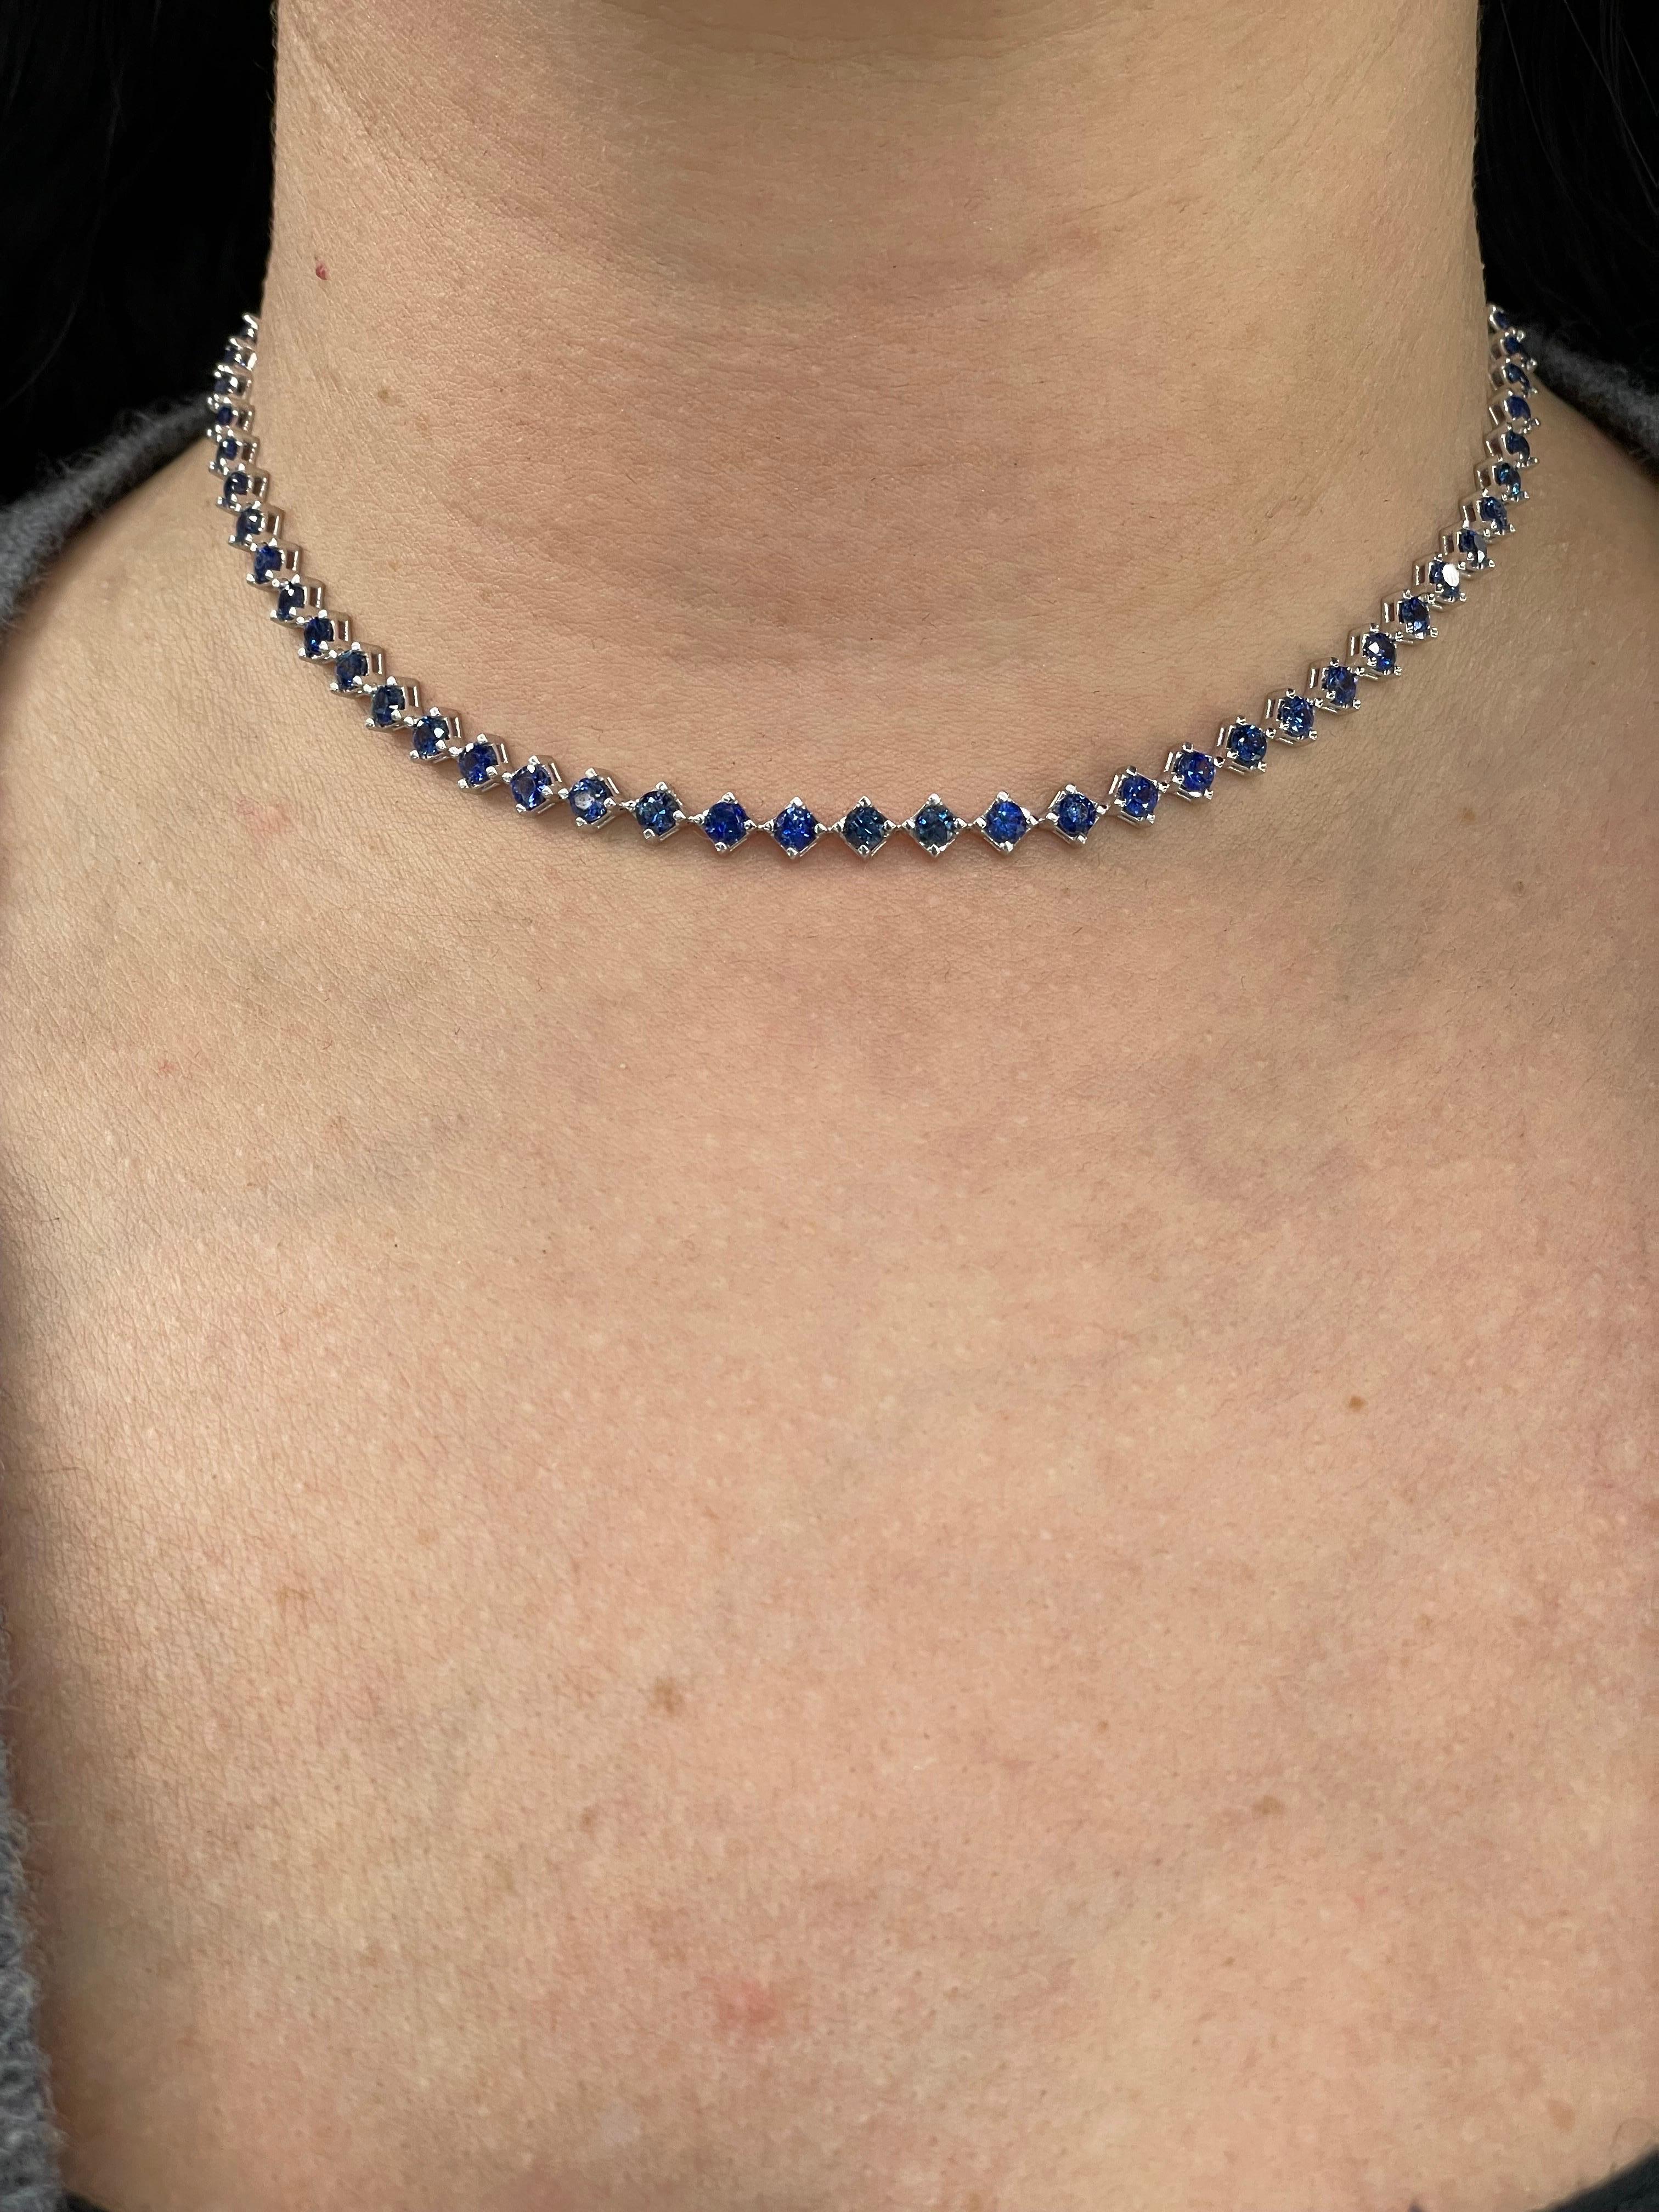 14 Karat White Gold Choker Necklace featuring 43 Blue Sapphires weighing 6.06 Carats, adjustable
Available in Pink Sapphire & Diamonds

Smaller versions available too
Extra gold links can be added.
DM for more videos & pictures on me